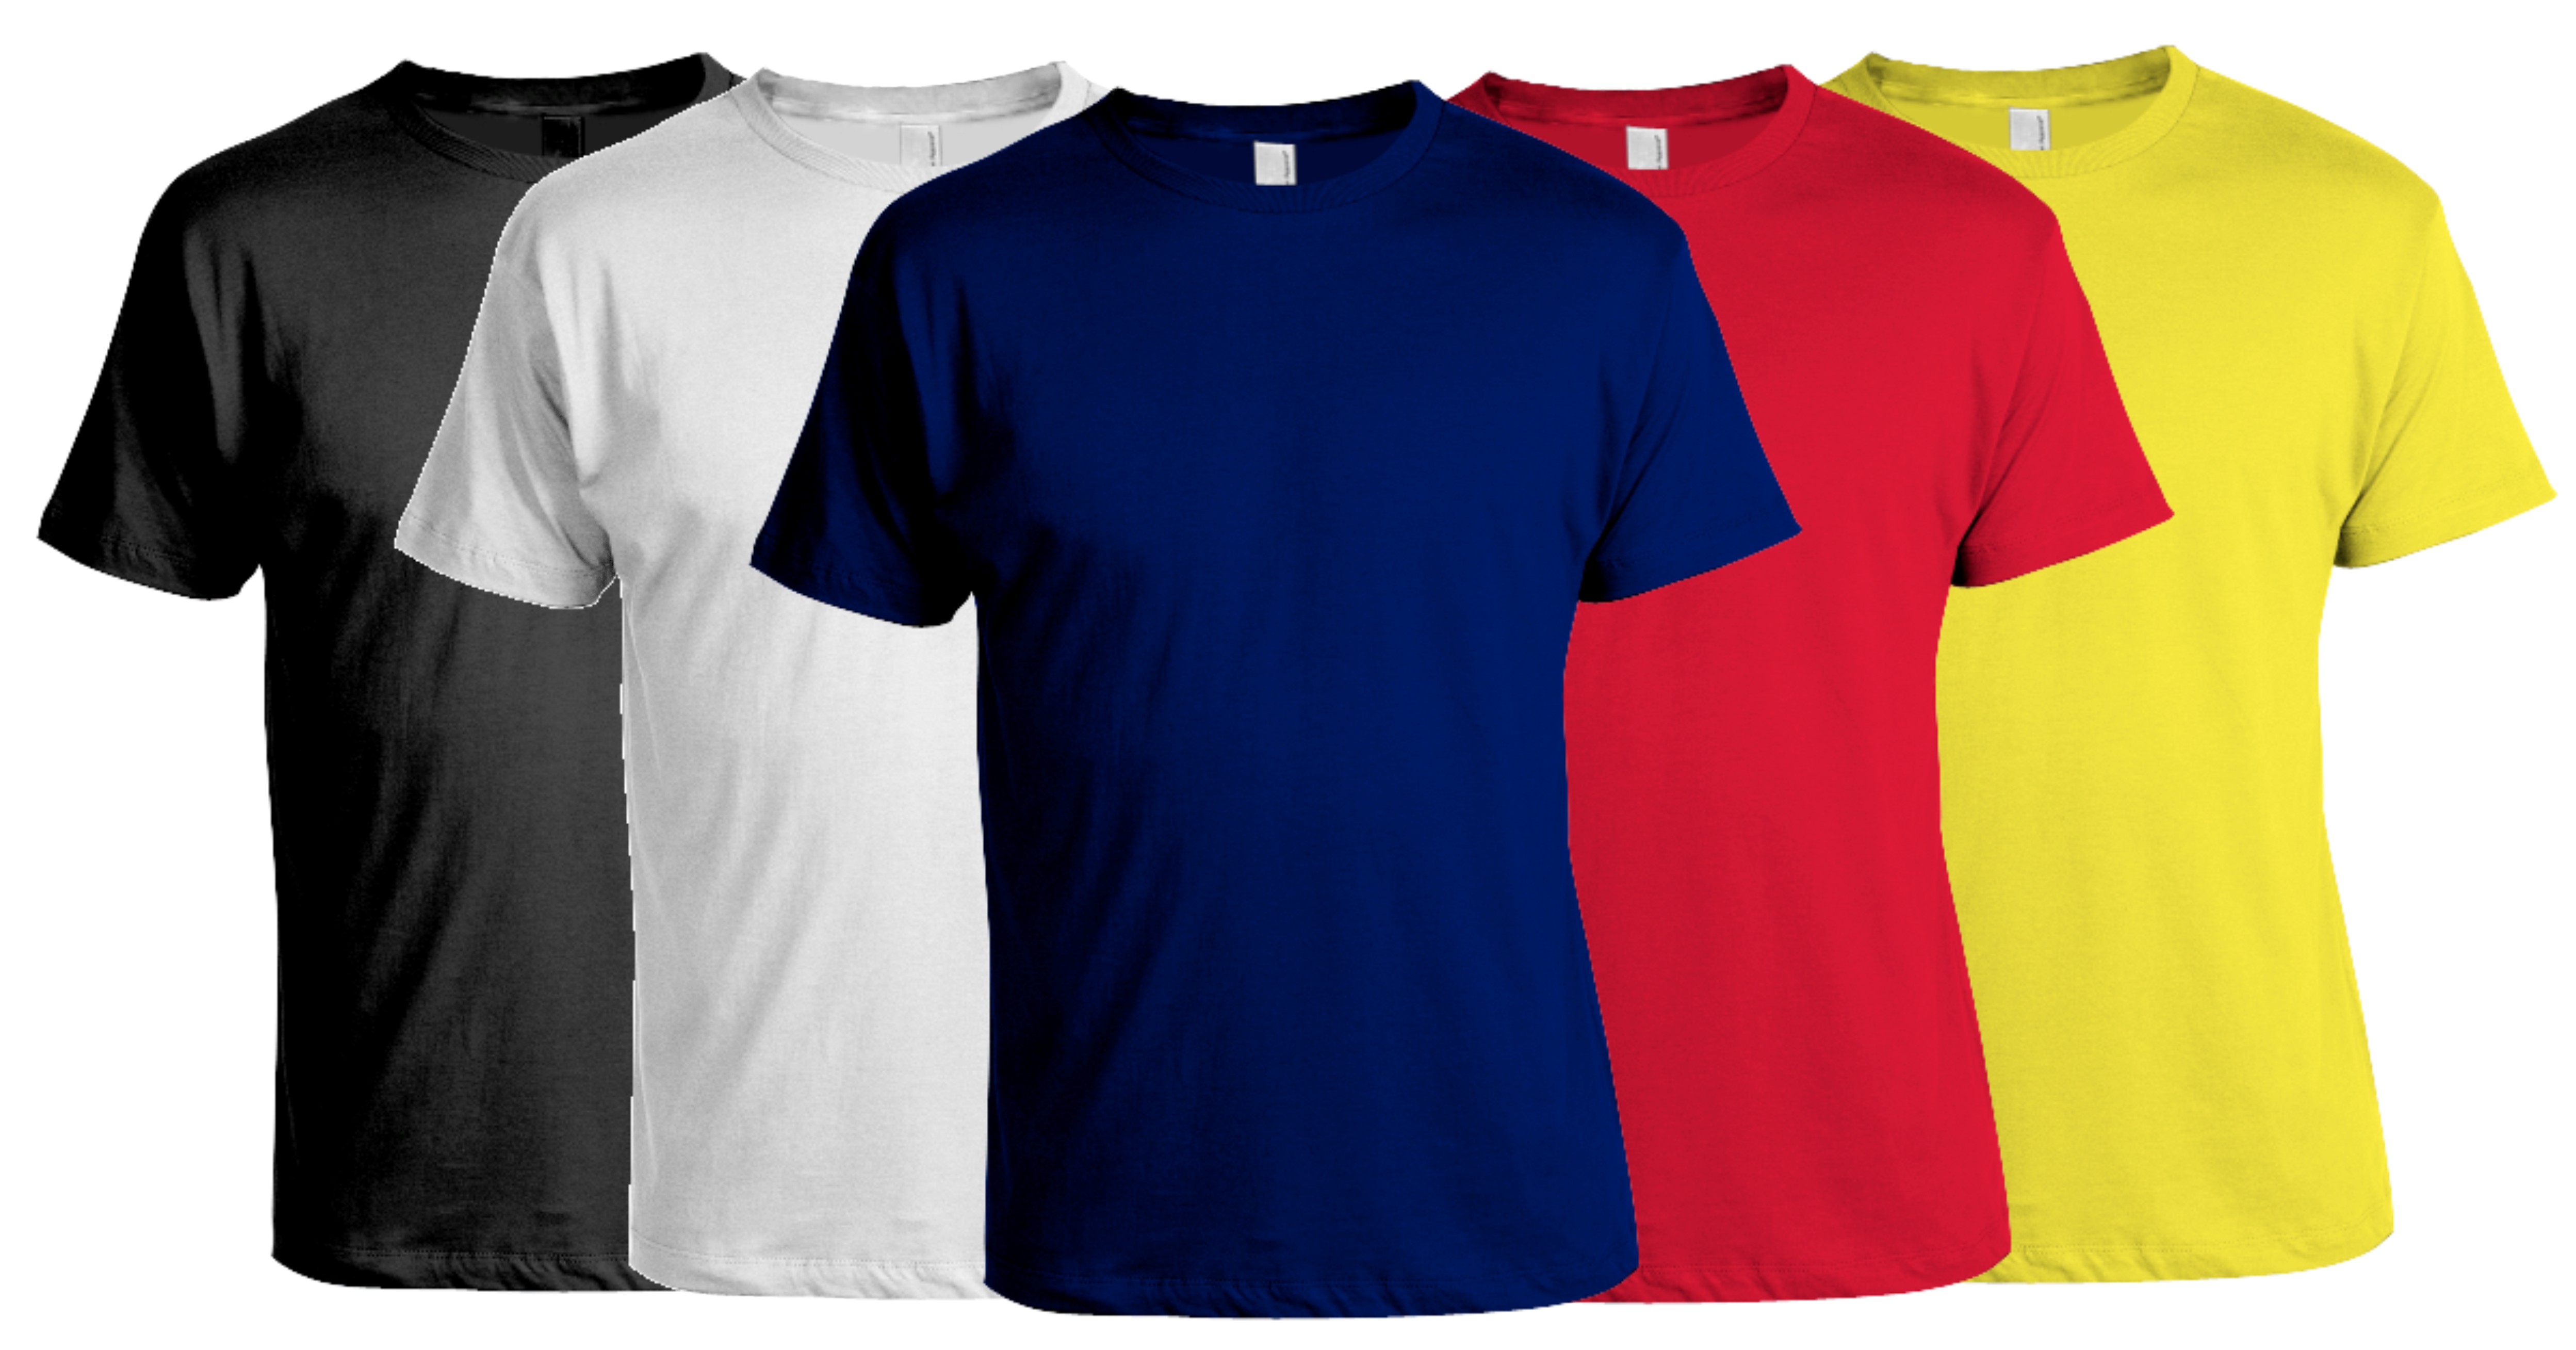 Where To Buy Wholesale Shirts For Screen Printing